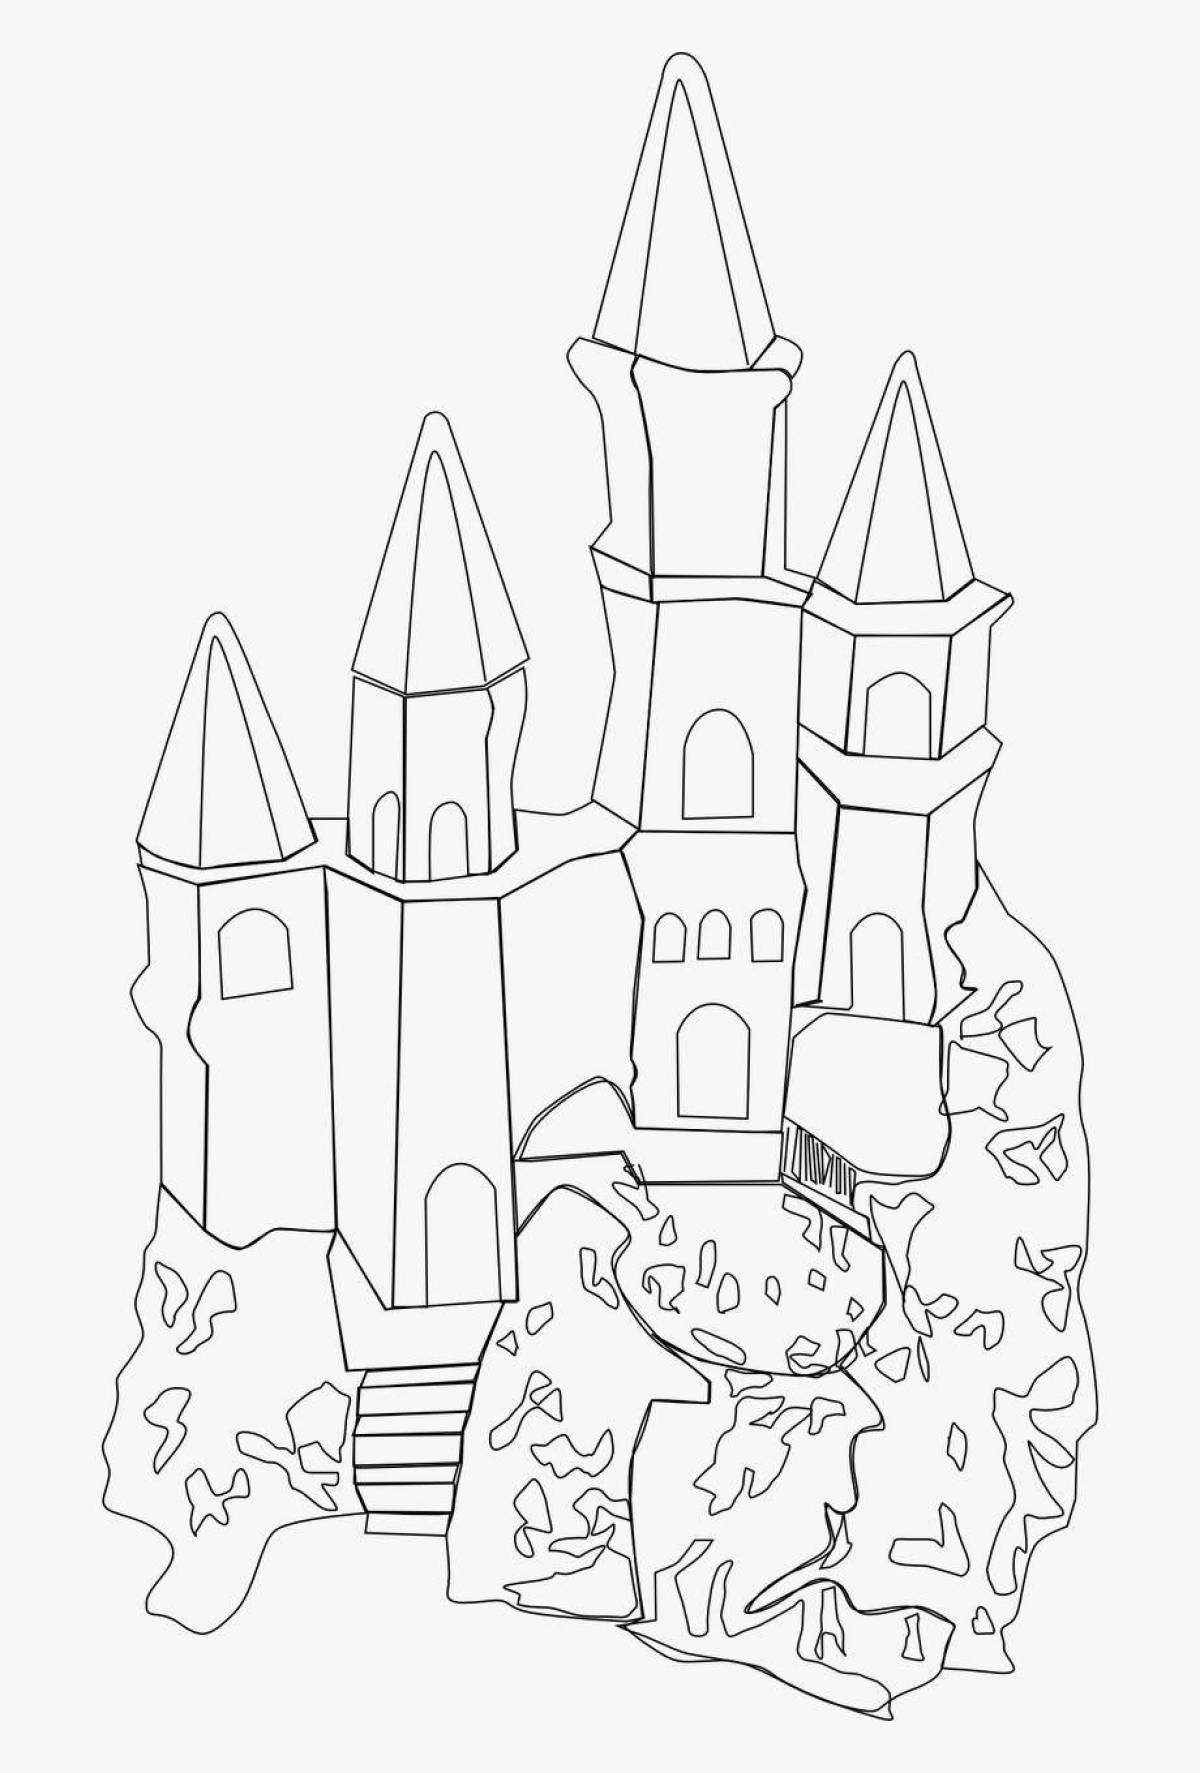 Coloring page of the dazzling snow queen's palace